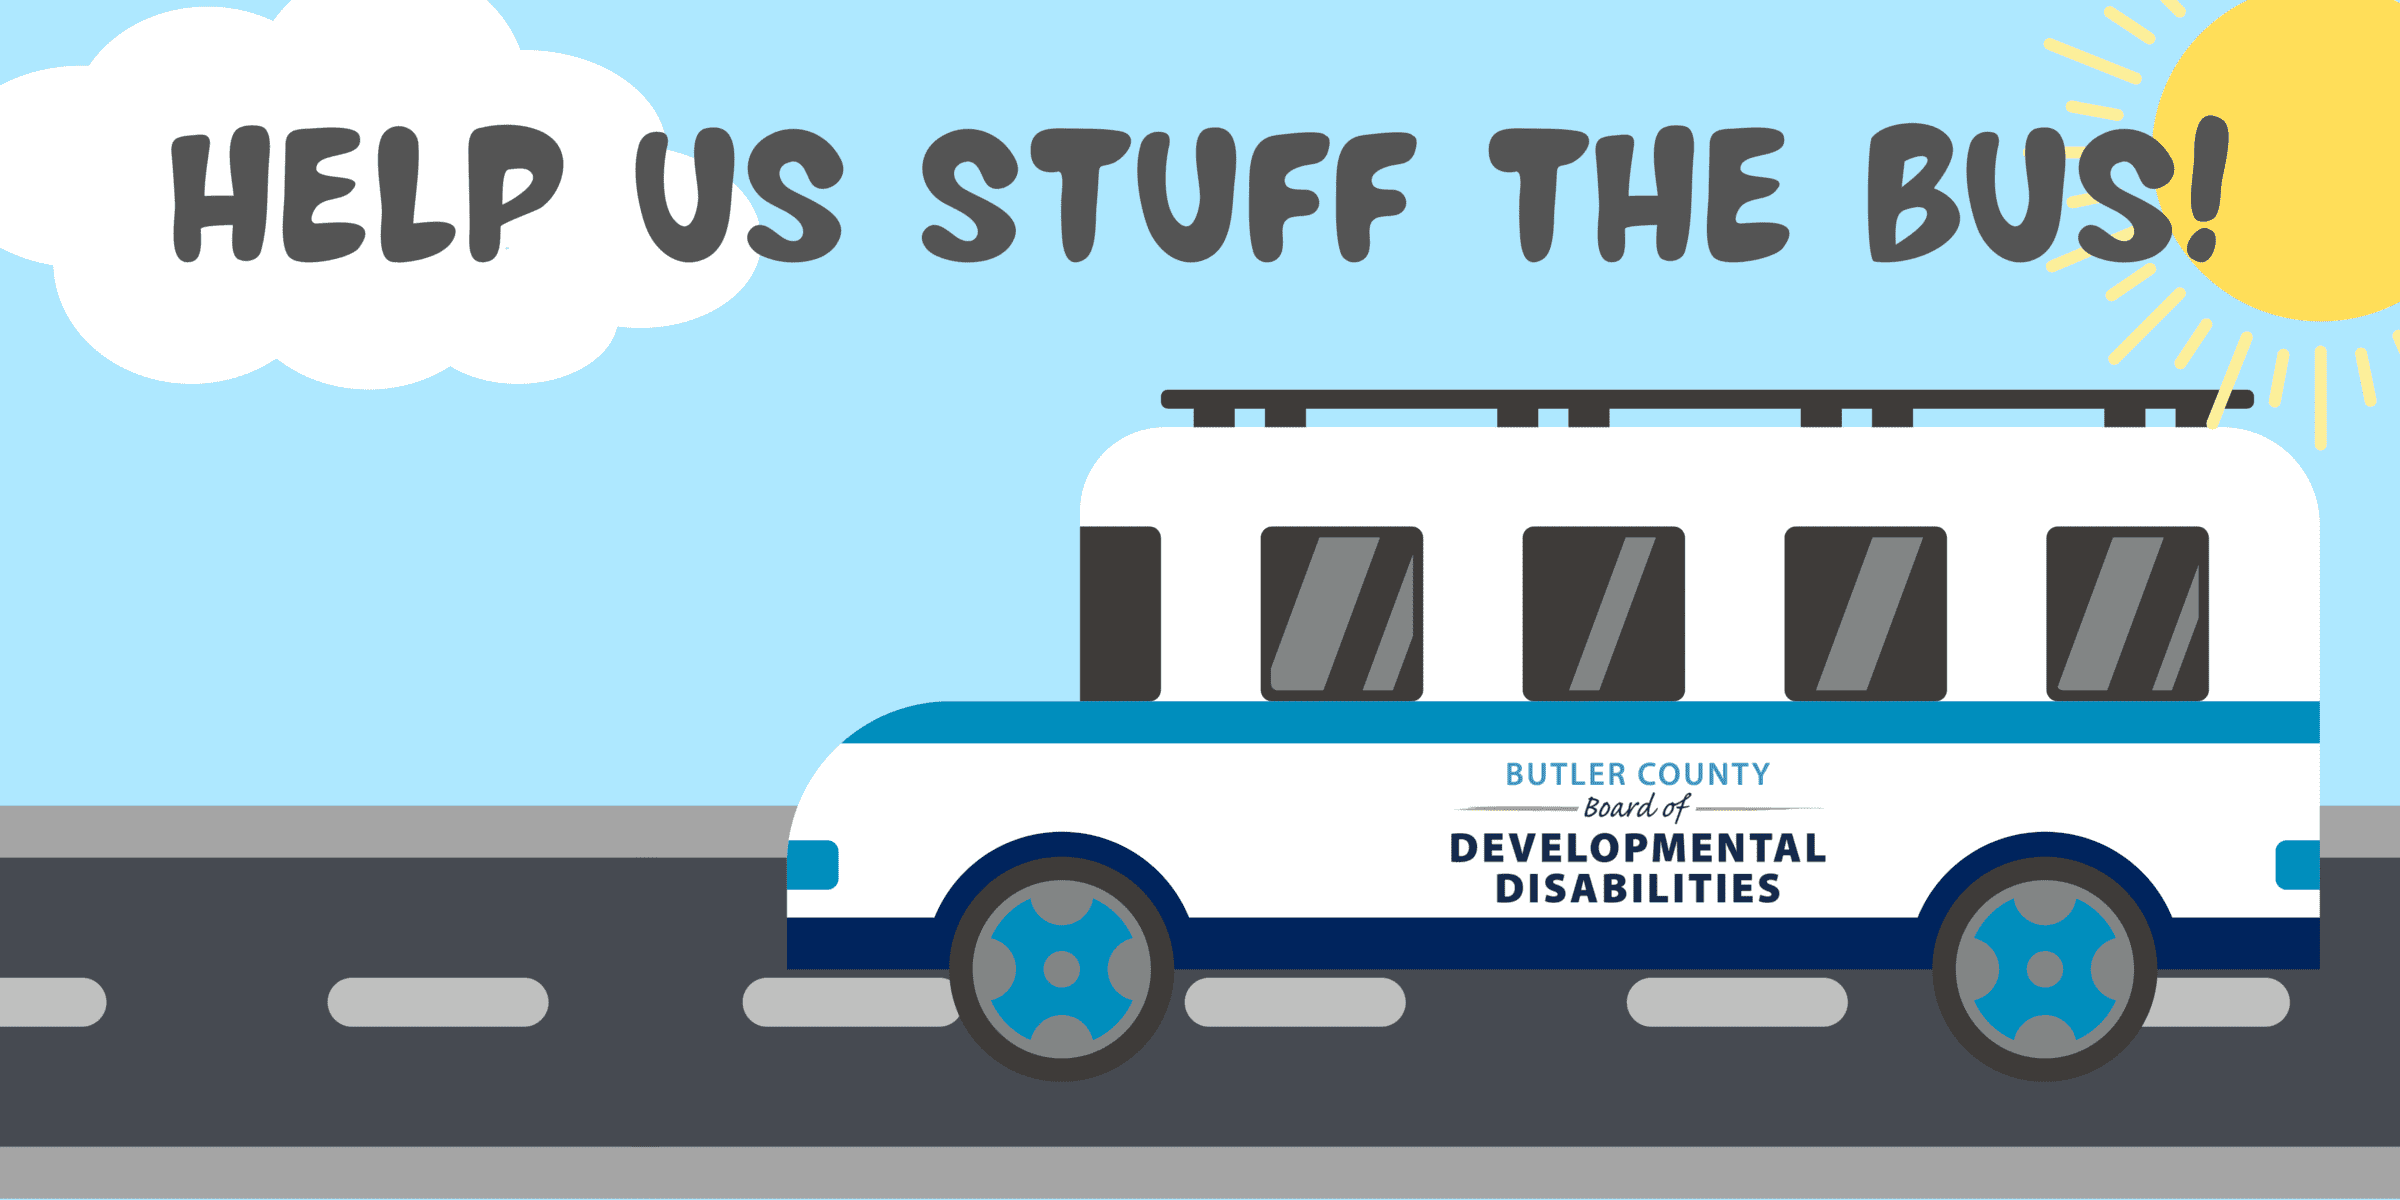 A graphic shows a bus with the Butler County Board of Developmental Disabilities logo on the side. The bus drives down a road on a sunny day. Text at the top of the image reads "Help us stuff the bus!"